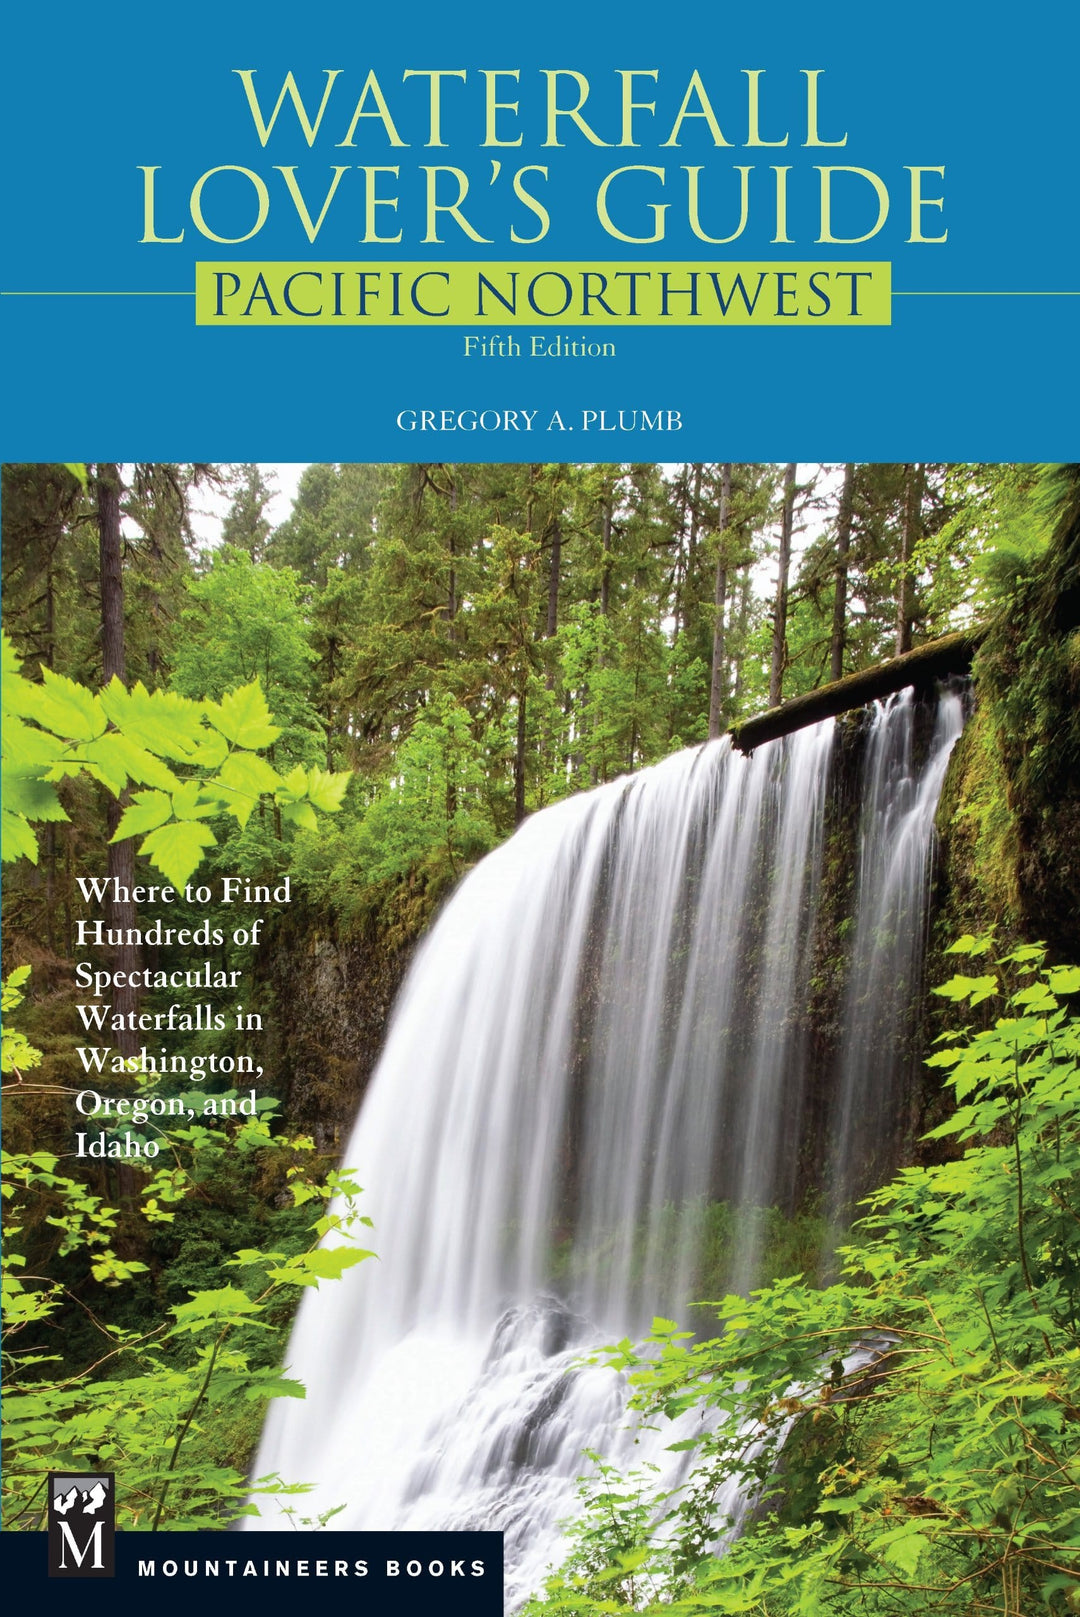 Mountaineers Books Book Waterfall Lover's Guide Pacific Northwest, 5th Edition